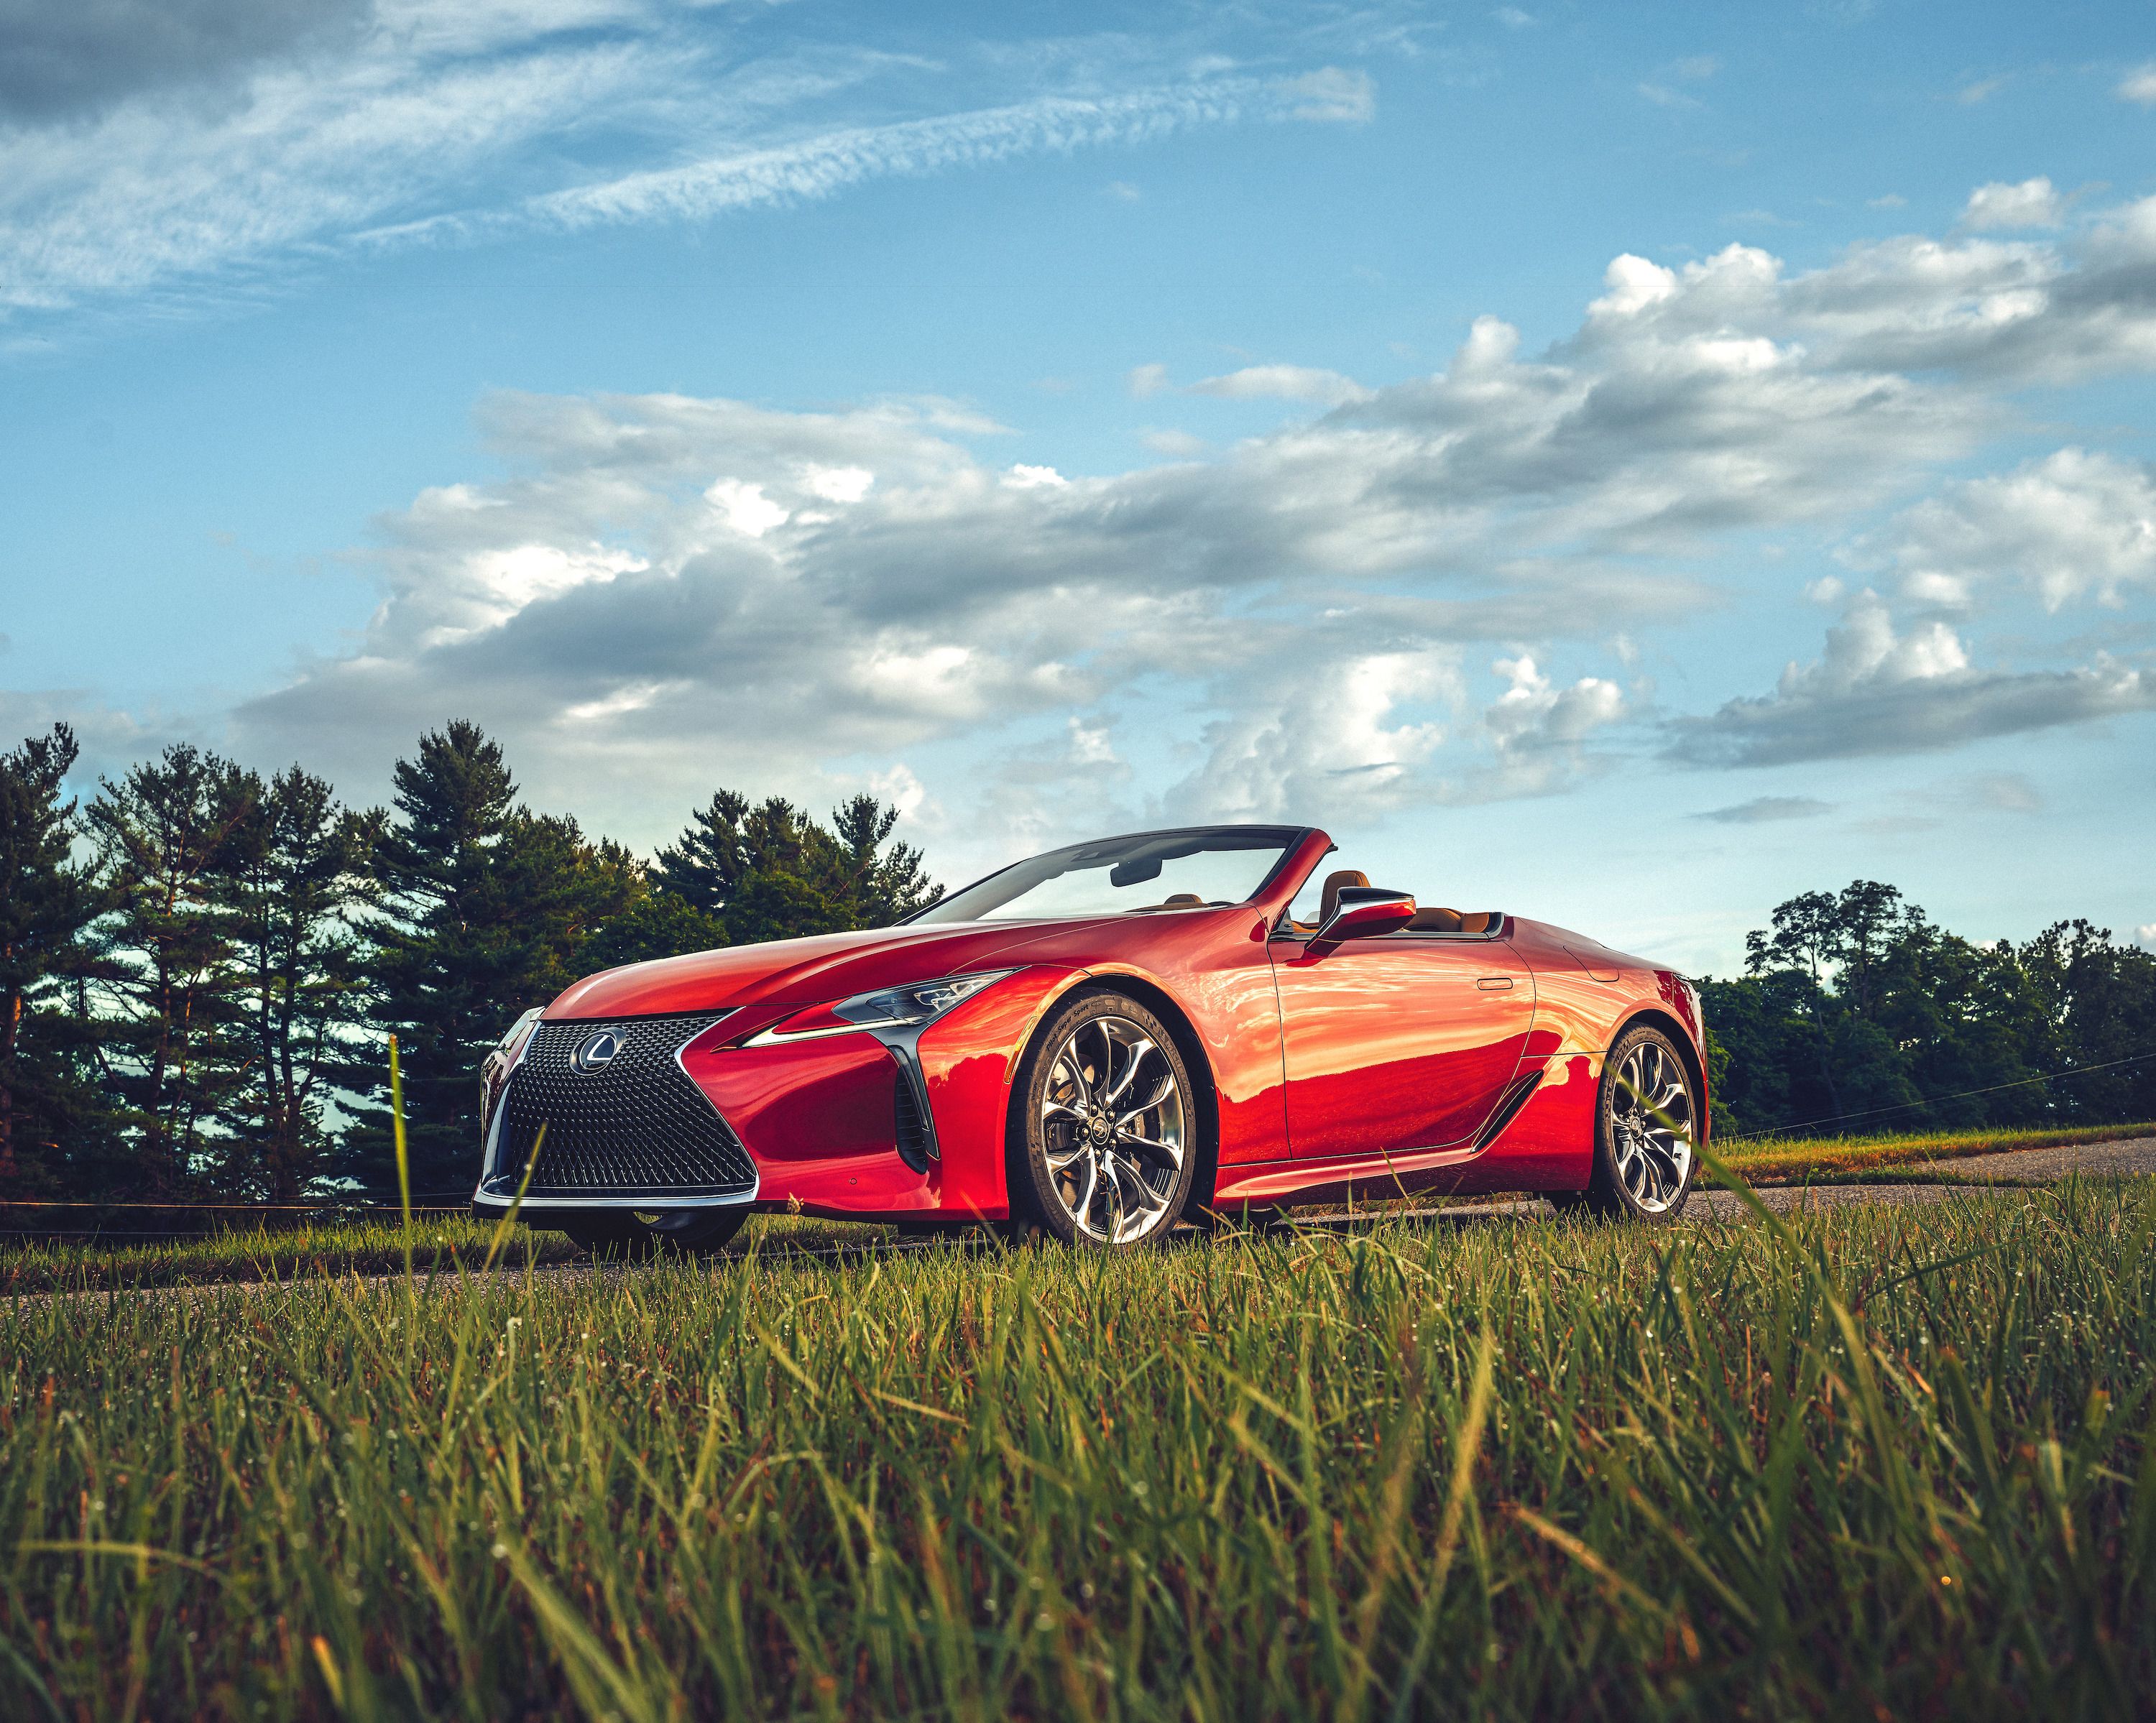 The Lexus LC500 Convertible Is the GT Car at Its Best - Review